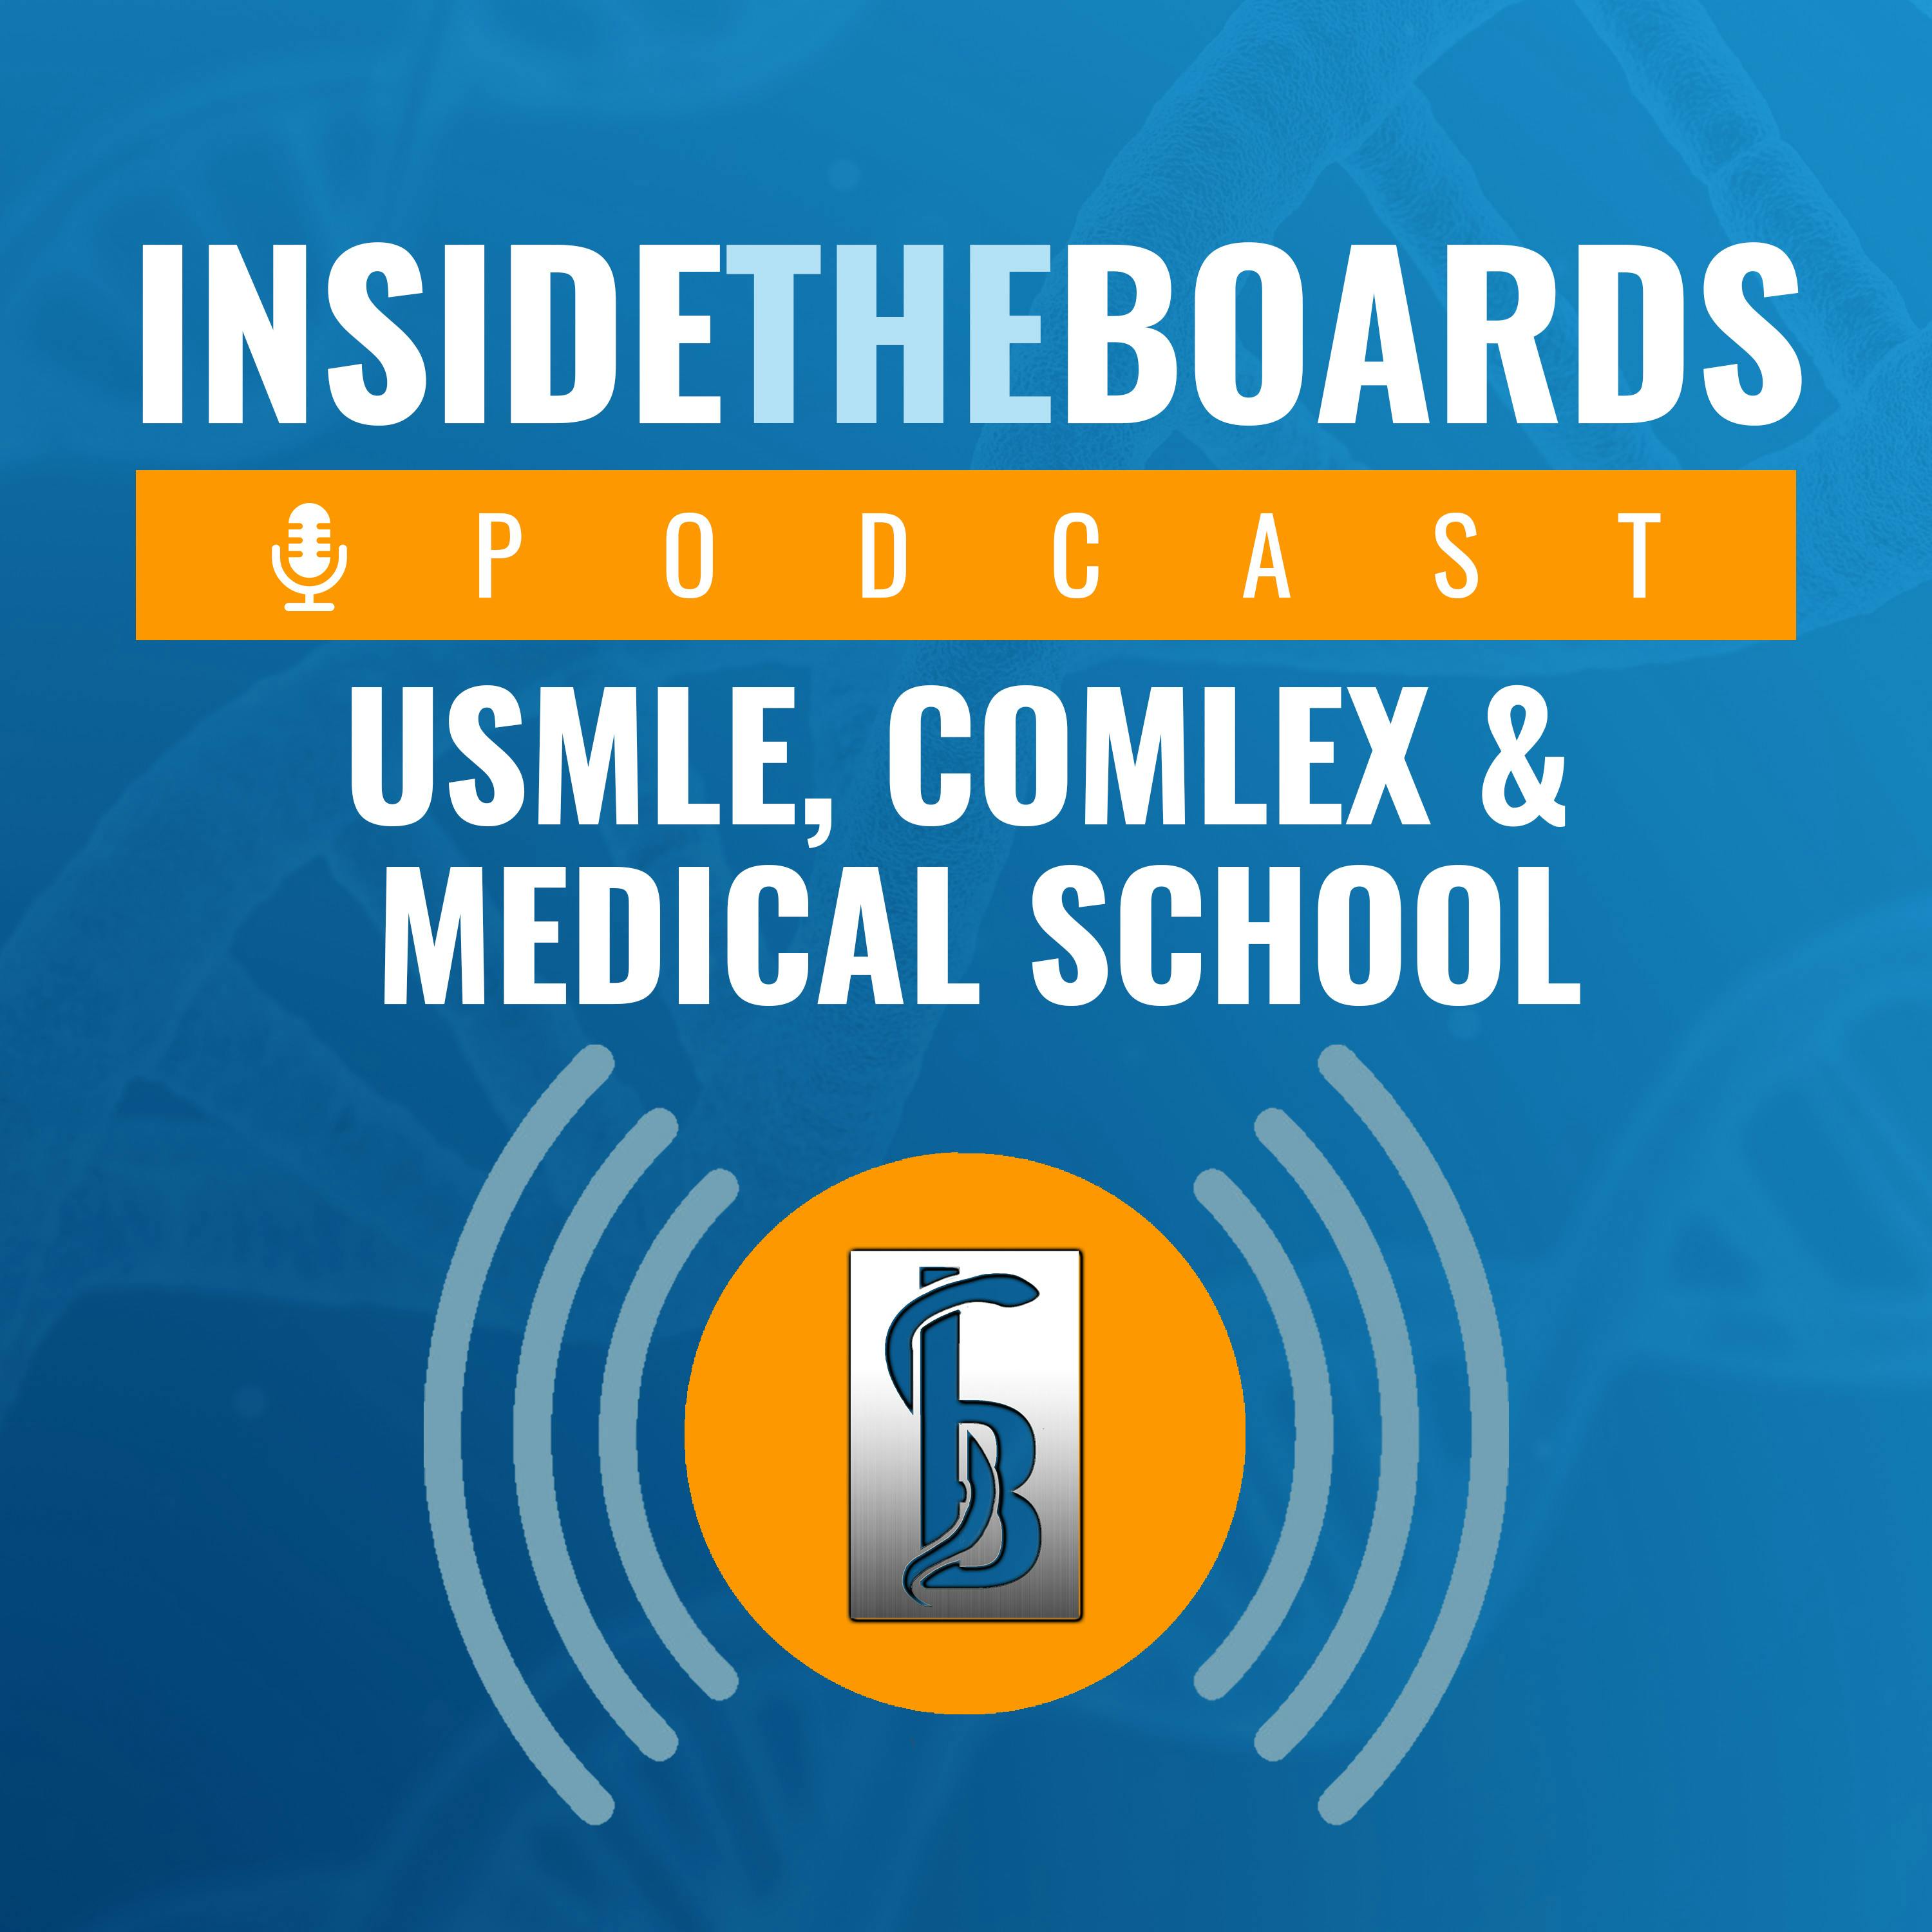 The Physiology of Medical Education and USMLE Prep (Part 2) with Rhett and Michael from Physeo